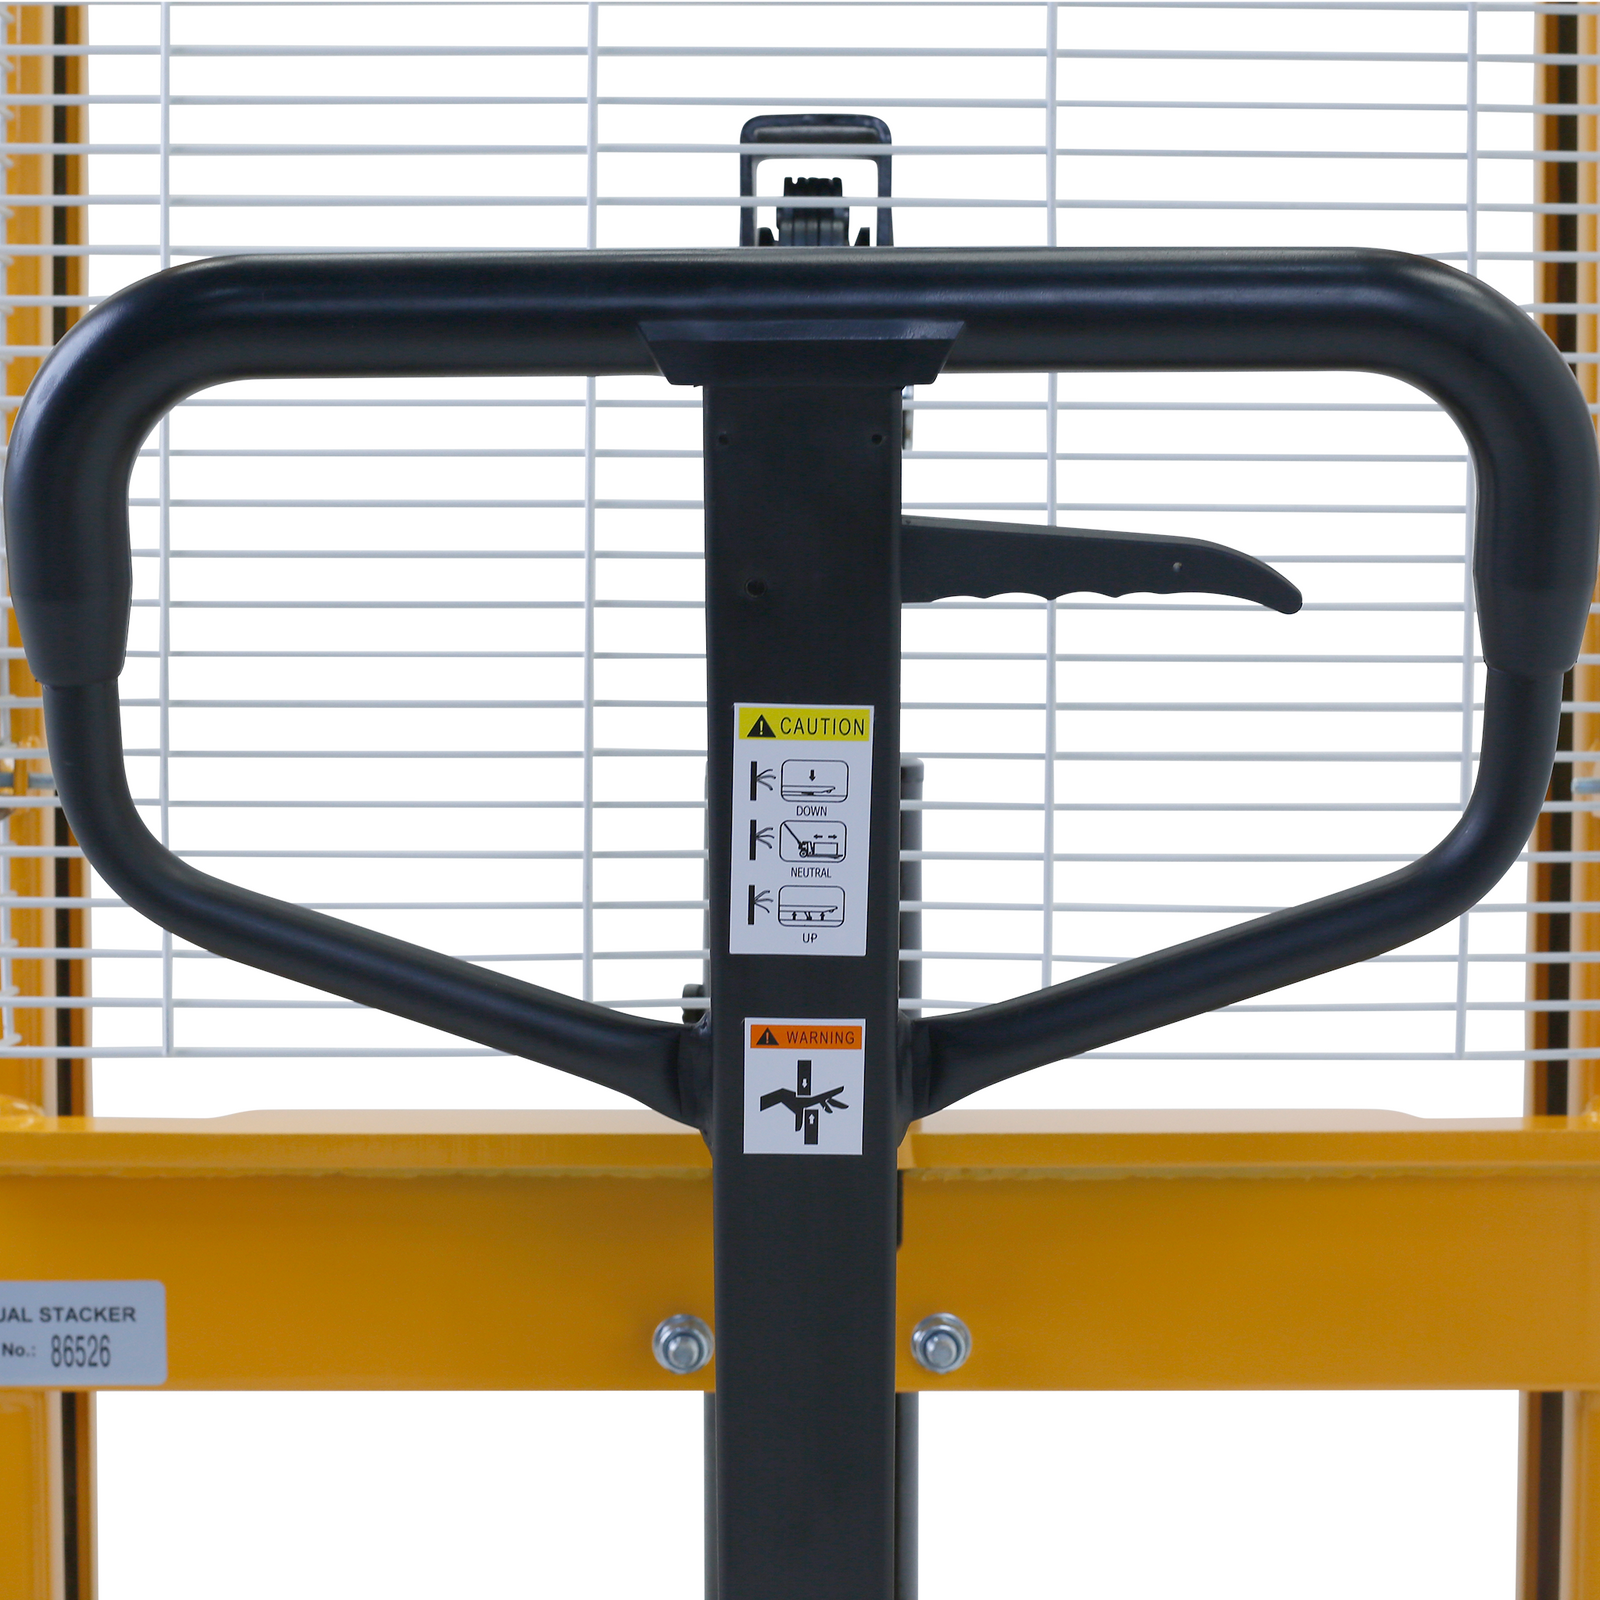 close up showing the handle of the JORESTECH pallet stacker